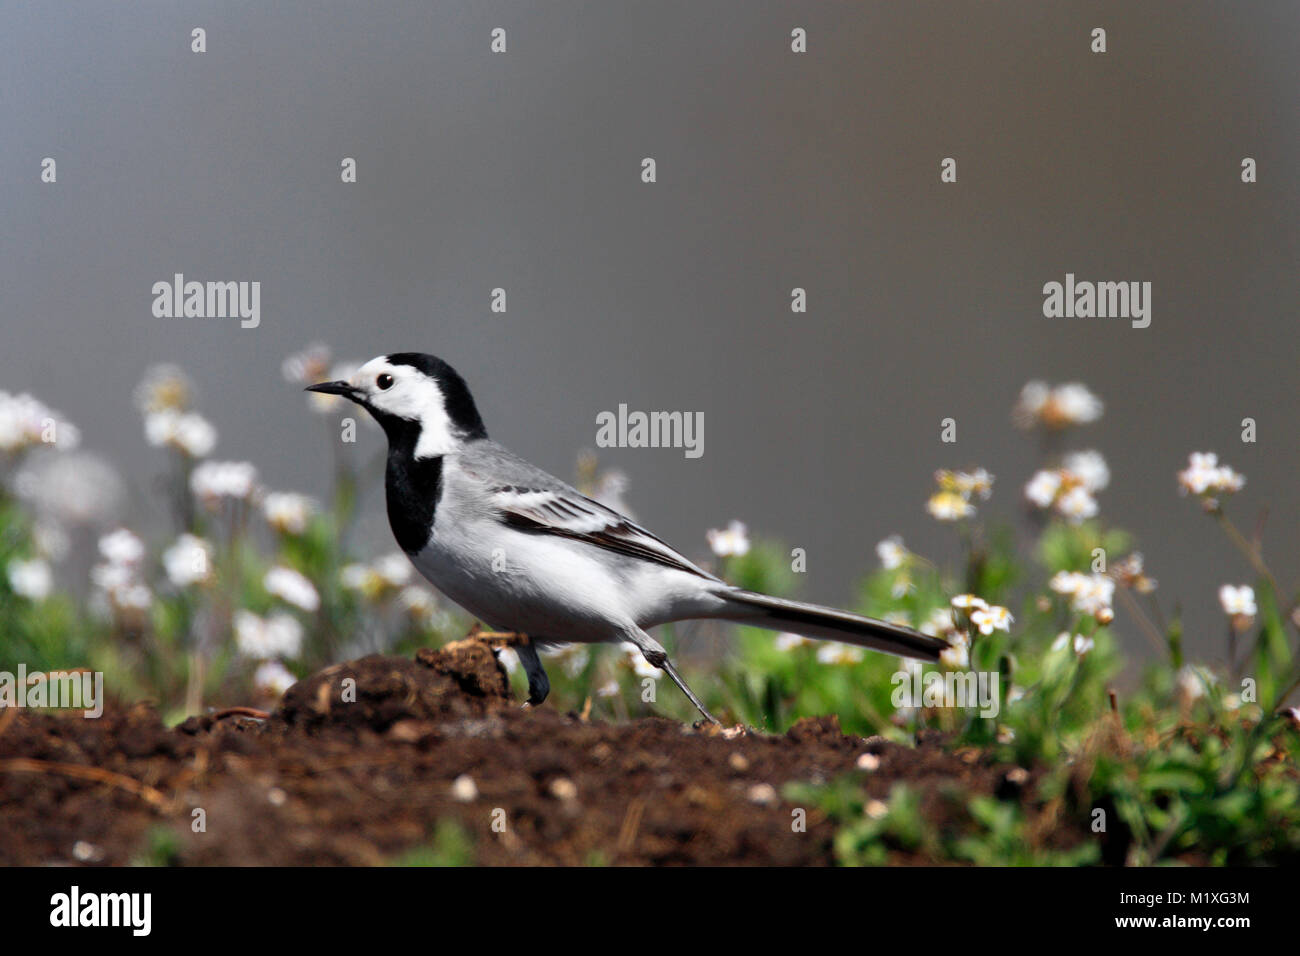 Single White wagtail bird on grassy wetlands during a spring nesting period Stock Photo